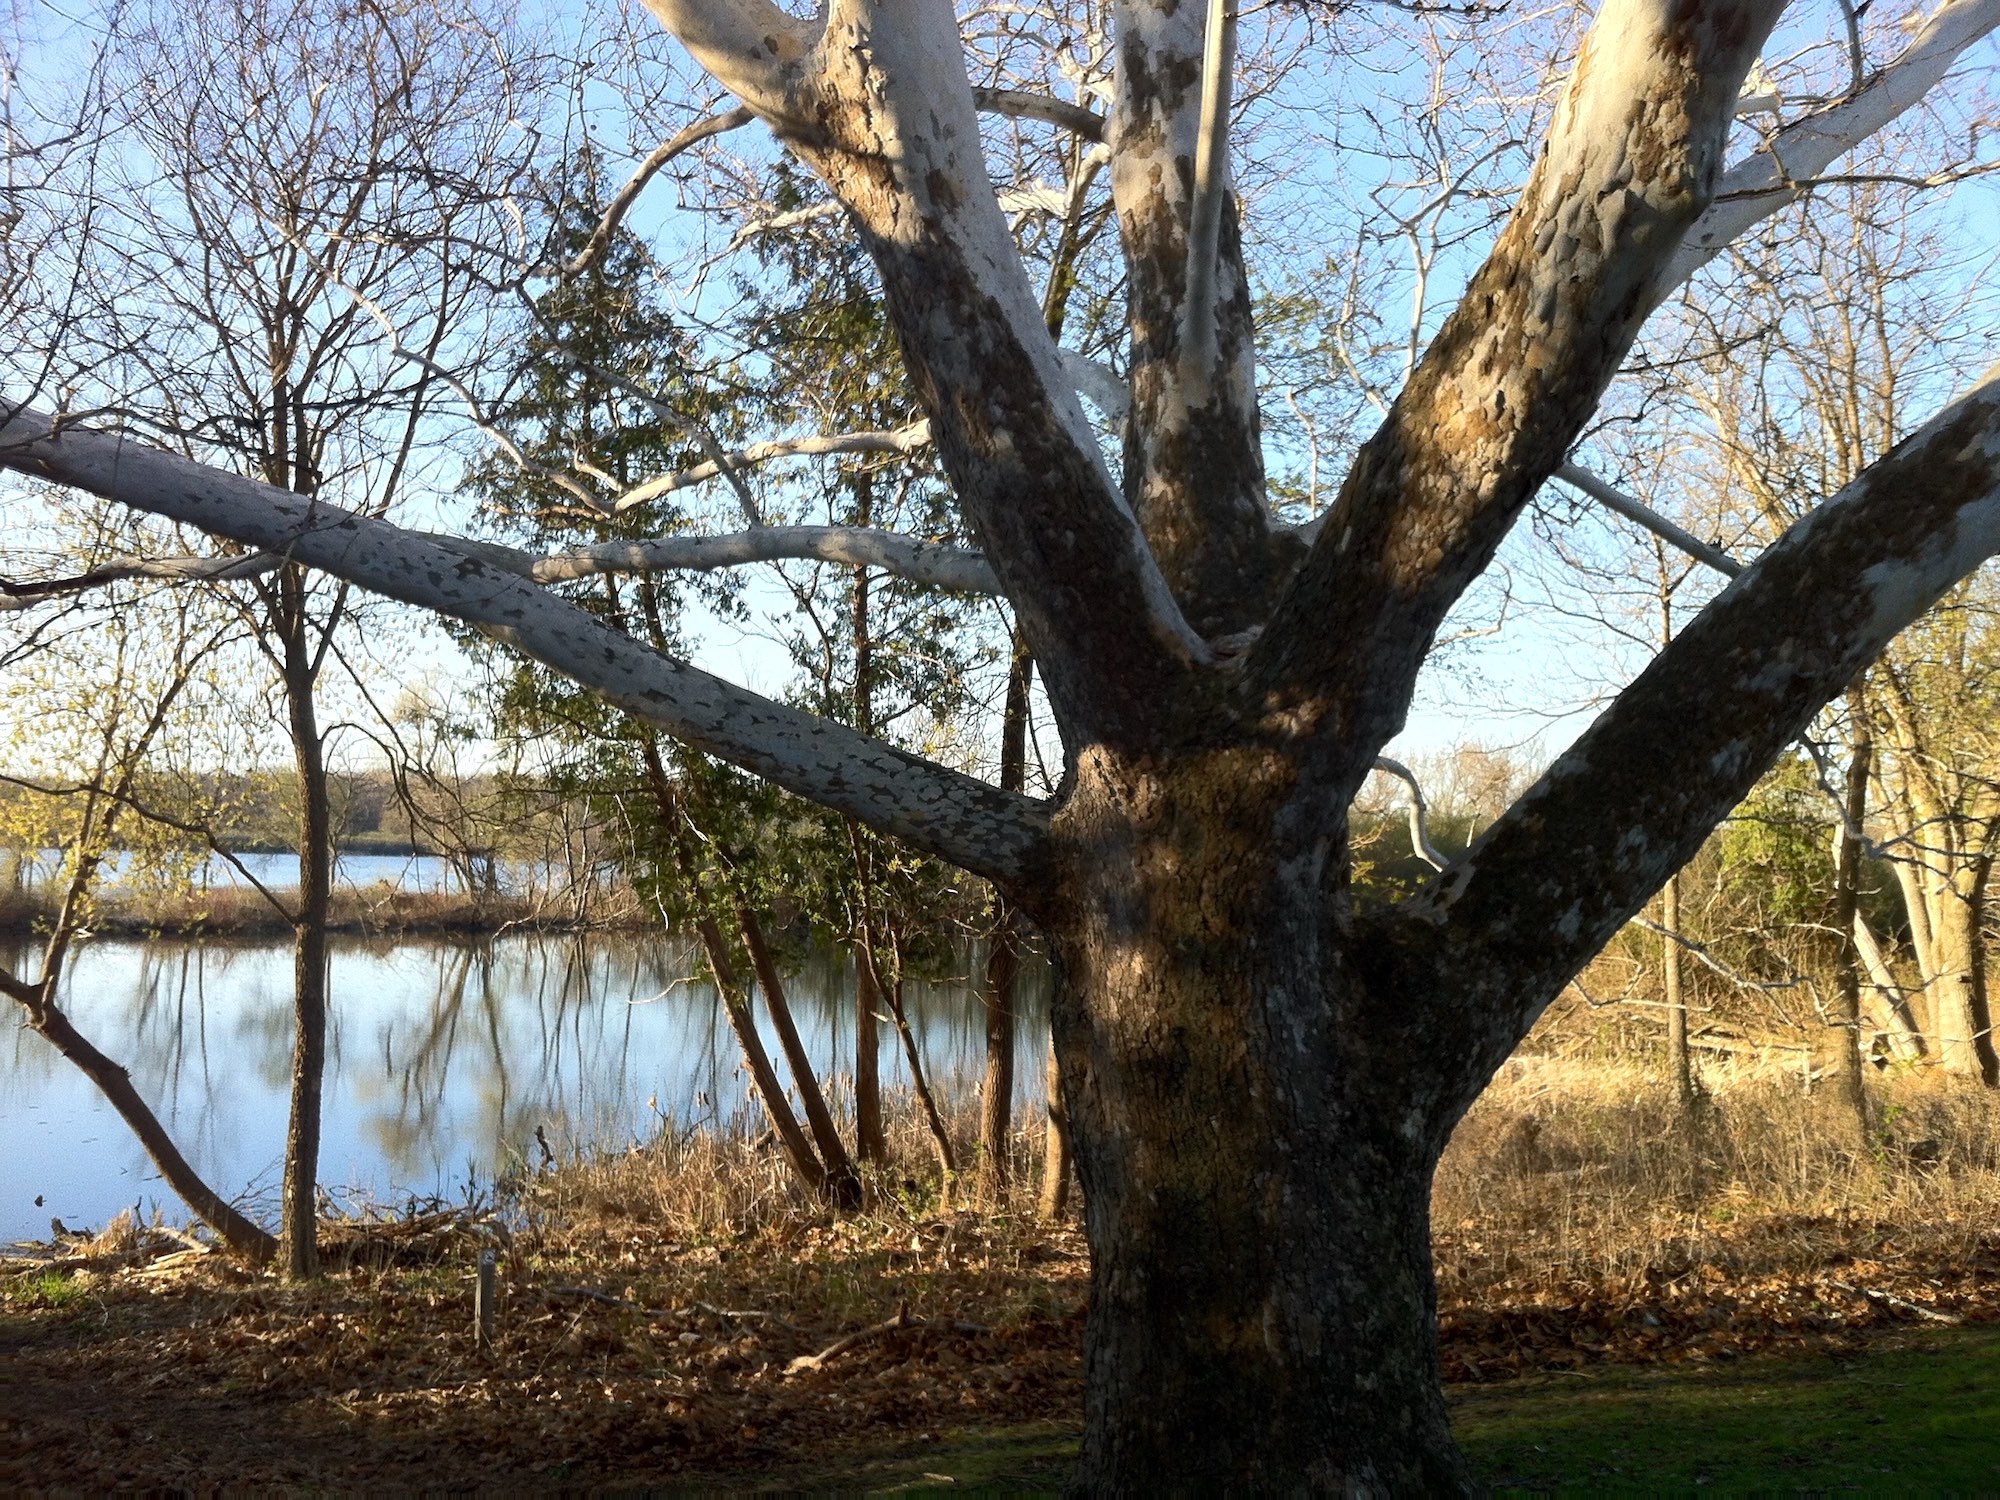 Sycamore tree between Ho-Nee-Um Pond and Arbor Drive on north shore of Lake Wingra on April 24, 2015.